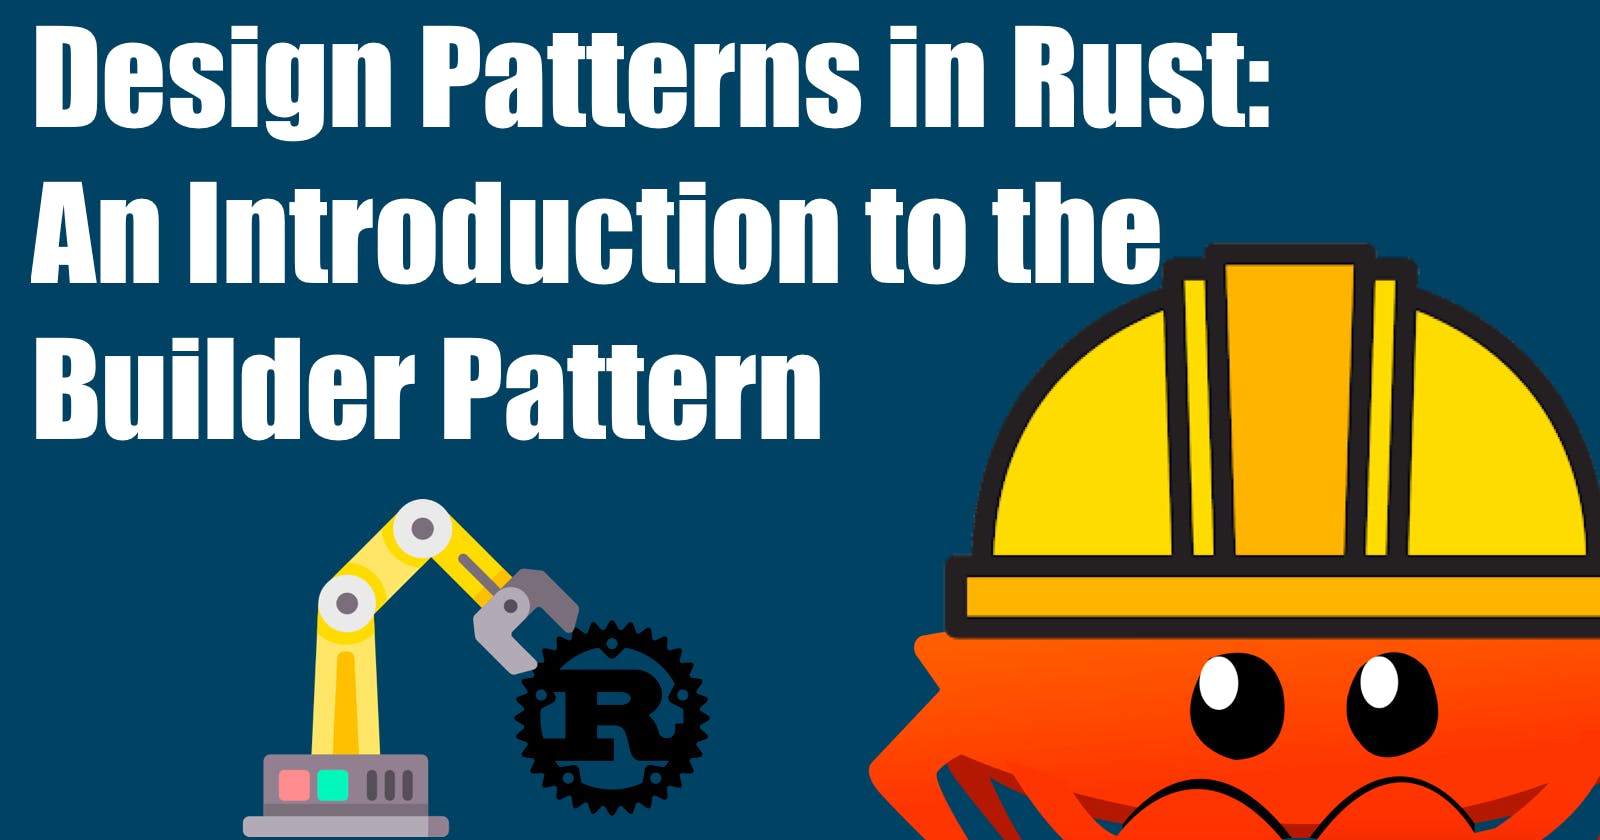 Design Patterns in Rust 🦀: An Introduction to the Builder Pattern